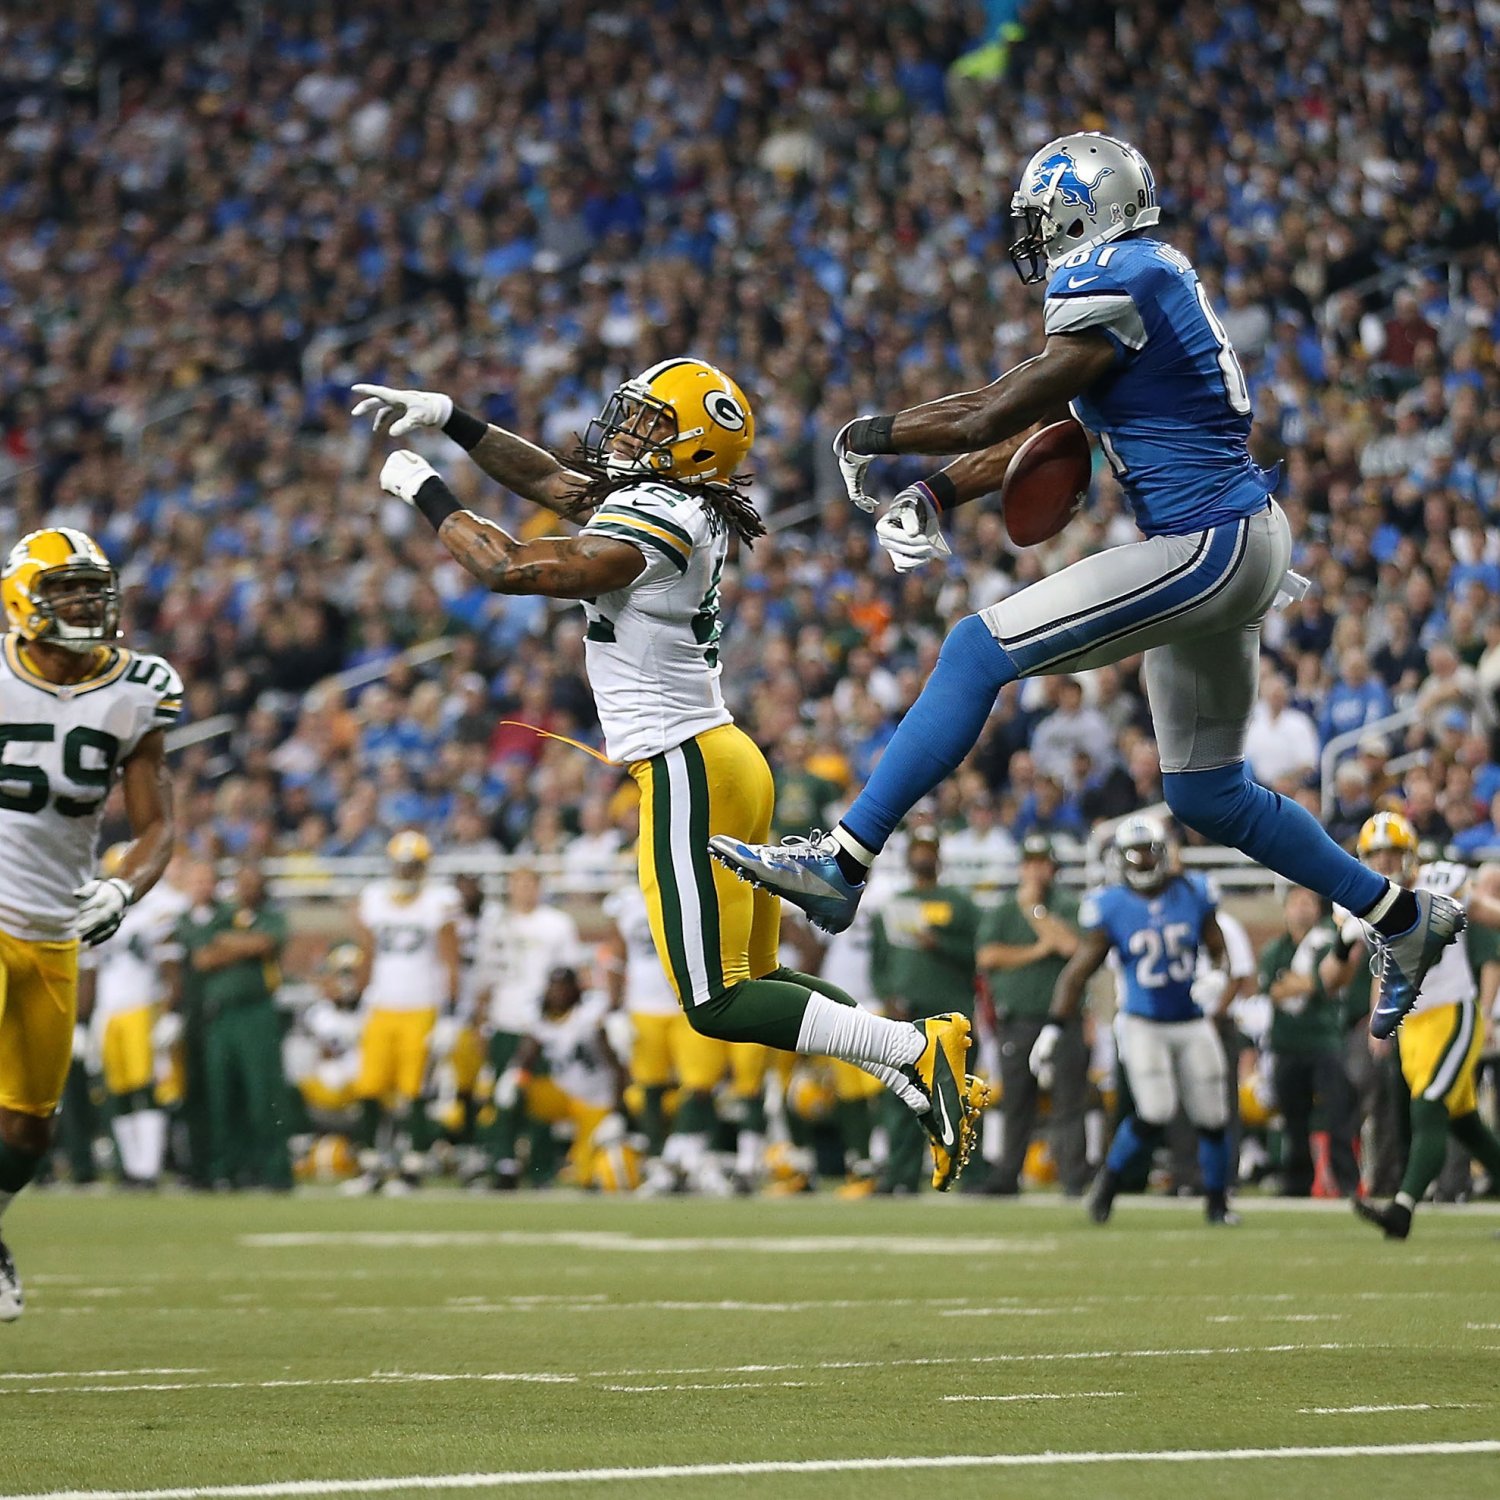 Detroit Lions vs. Green Bay Packers Live Score, Highlights and